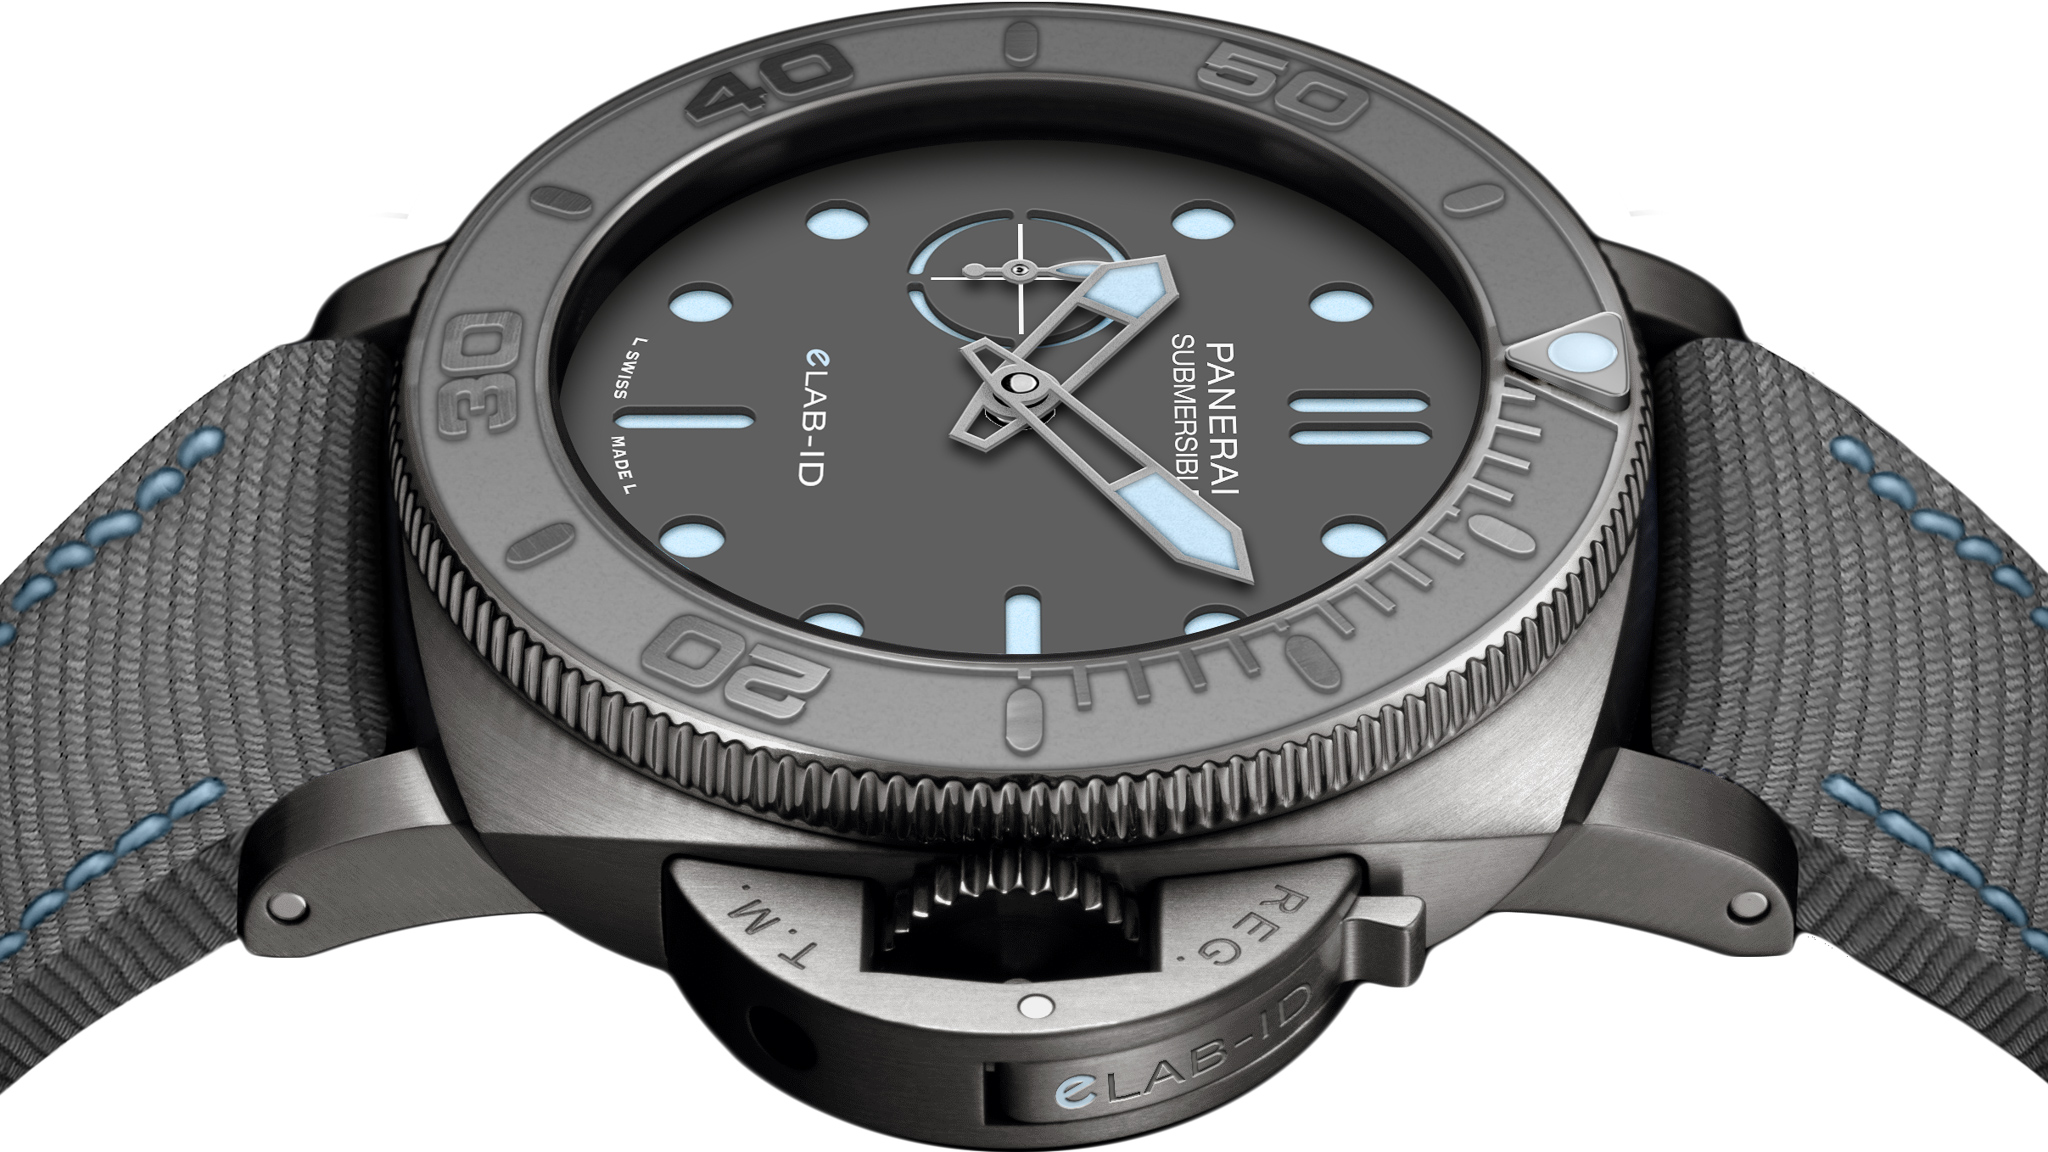 Panerai Unveils Concept Submersible Watch Made With Nearly 100% Recycled Materials